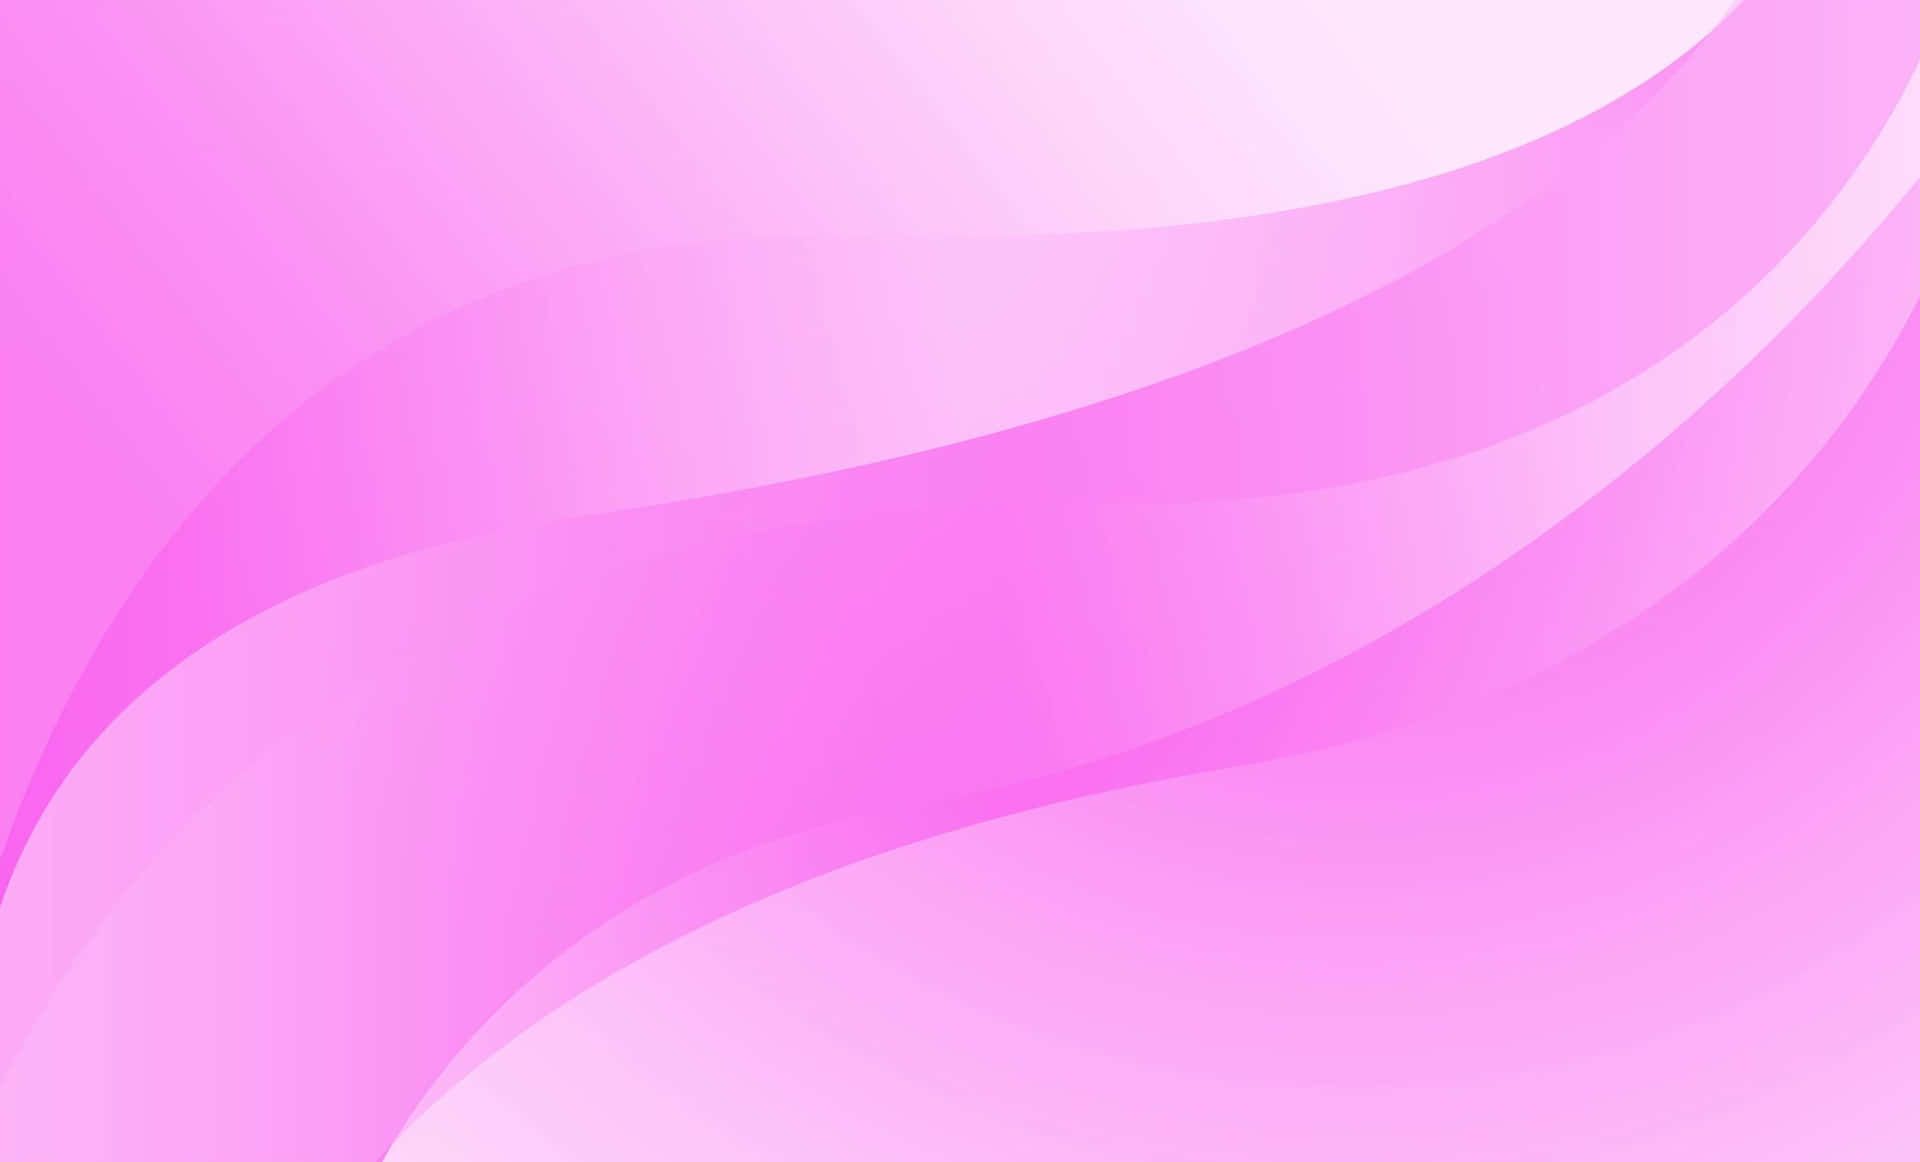 A wonderful abstract blend of pink and purple.